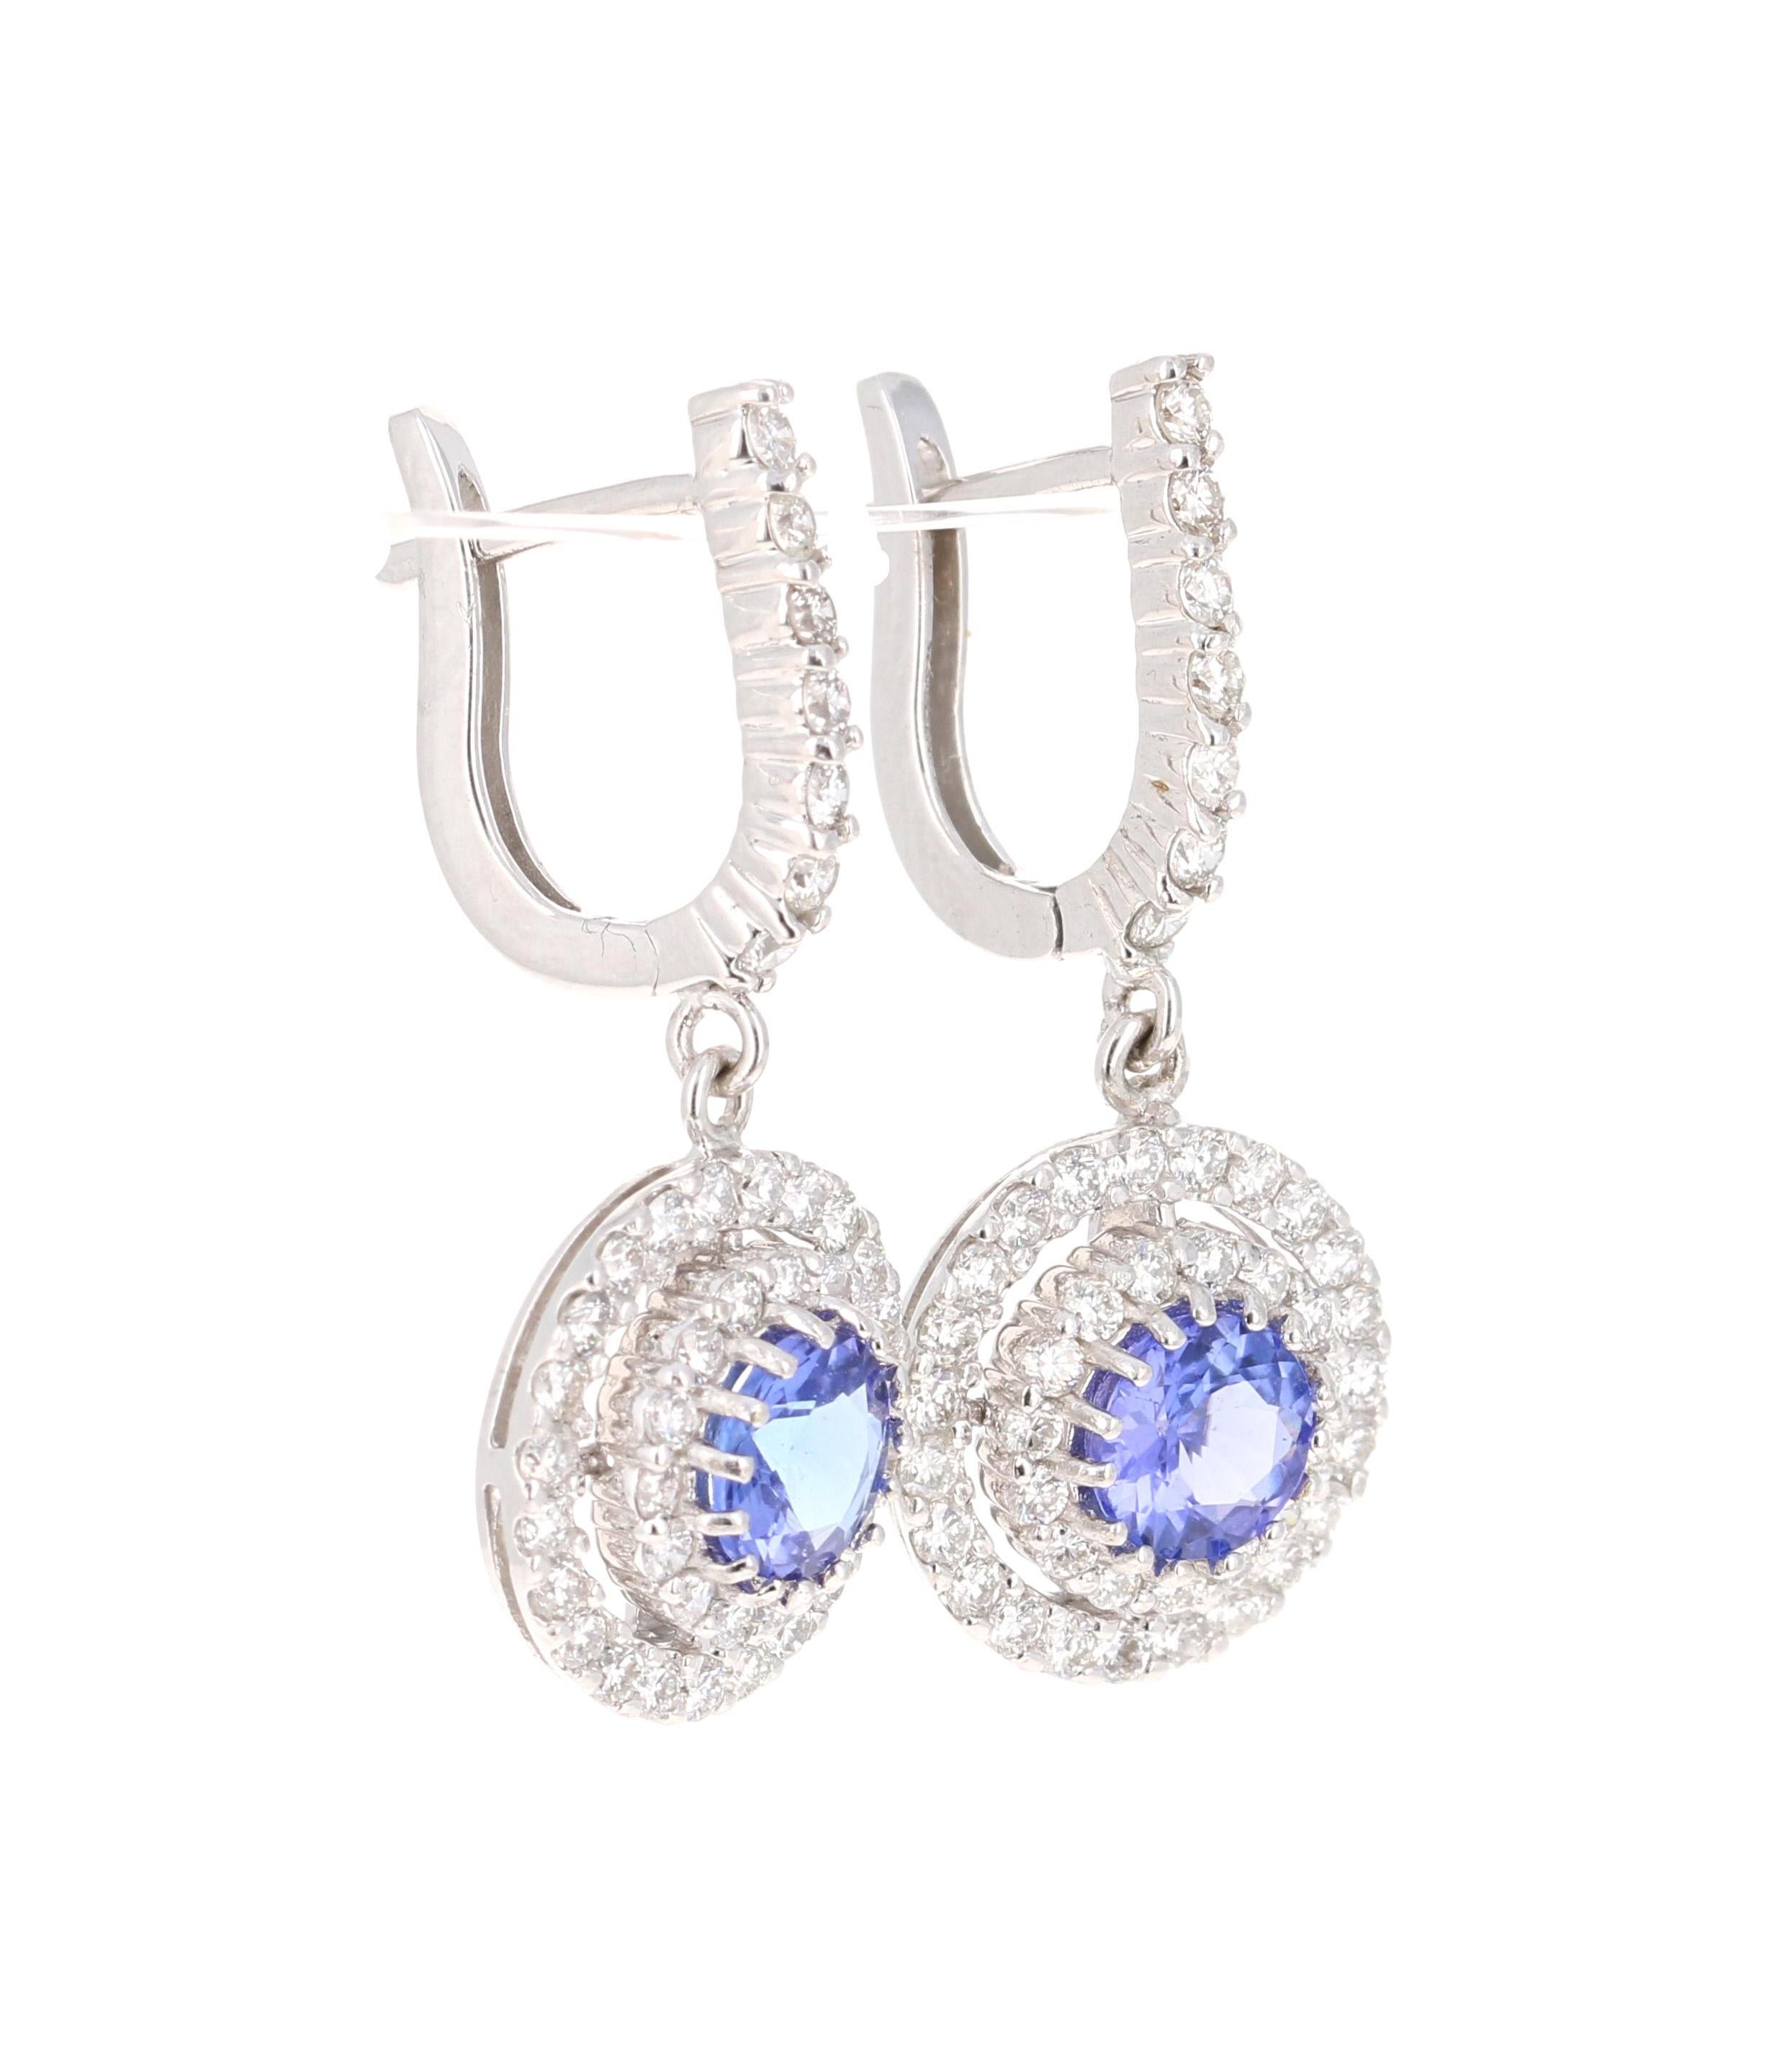 The most stunning tanzanite diamond earrings! Classy and Chic!

These beauties have 2 Round Cut Tanzanites that weigh 1.51 Carats and 90 Round Cut Diamonds that weigh 1.52 Carats. The total carat weight of the earrings are 3.03 Carats. (Clarity: VS,